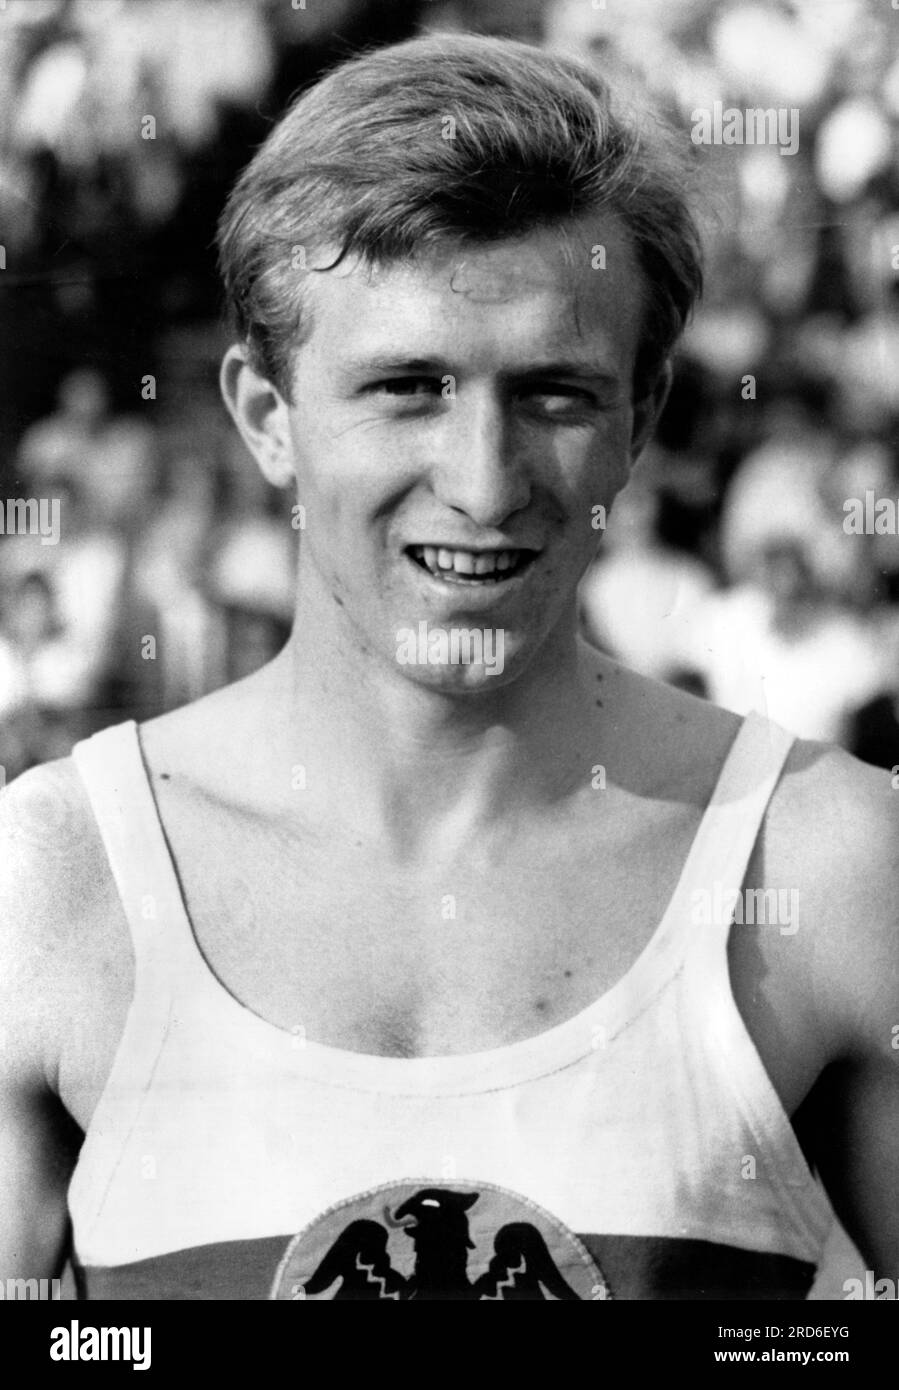 Wucherer, Gerhard, * 11.2.1948, German athlete, 1969, ADDITIONAL-RIGHTS-CLEARANCE-INFO-NOT-AVAILABLE Stock Photo